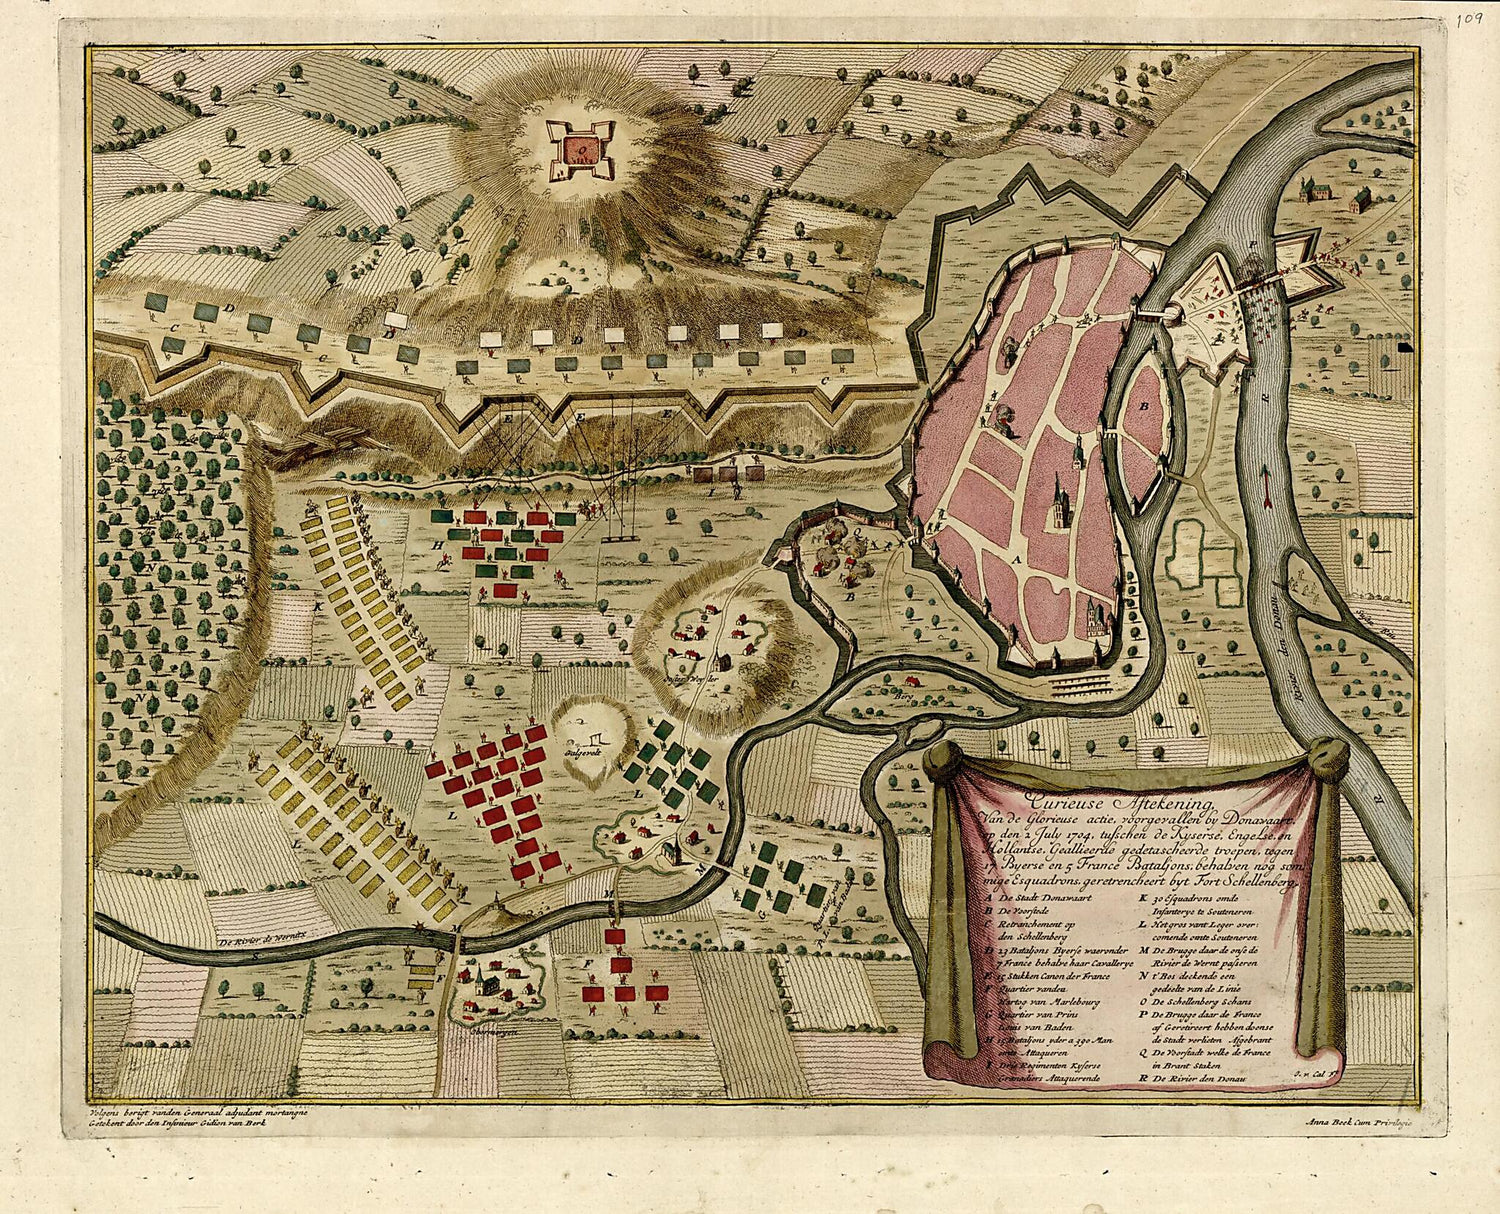 This old map of Curieuse Astekening Van De Glorieuse Actie Voorgevallen by Donawaart from a Collection of Plans of Fortifications and Battles, 1684-from 1709 from 1709 was created by Anna Beeck in 1709